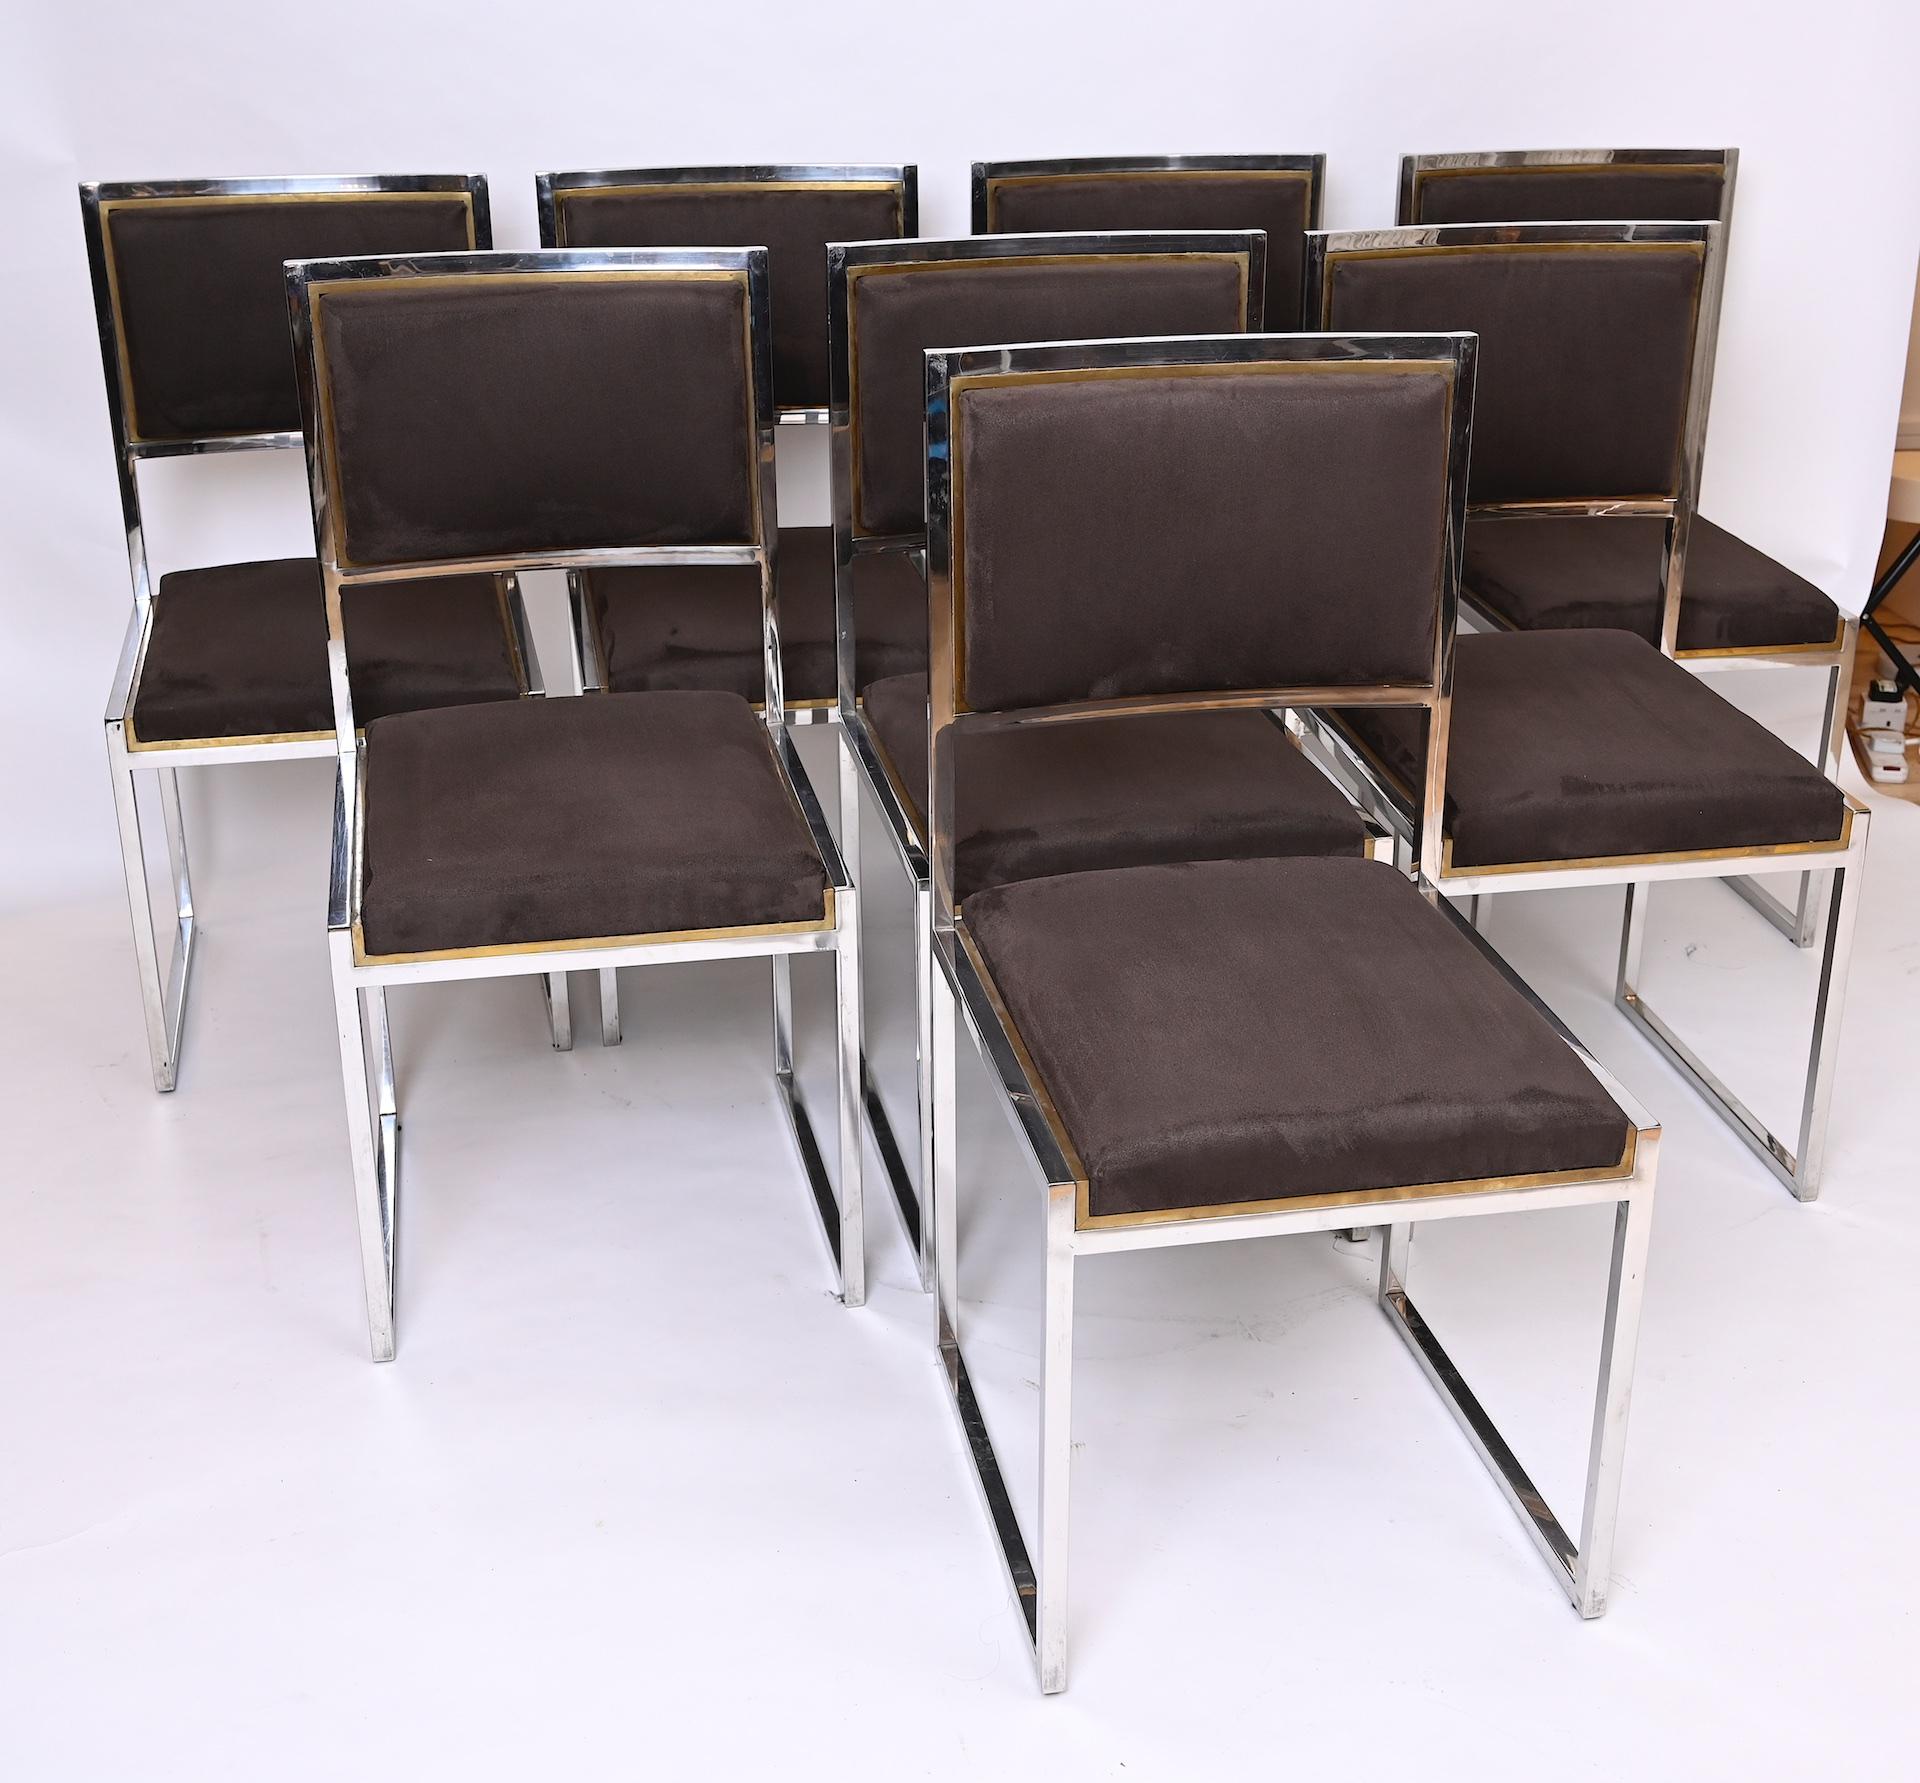 Italian Set of 8 Willy Rizzo Brass and Chrome Chairs, circa 1970